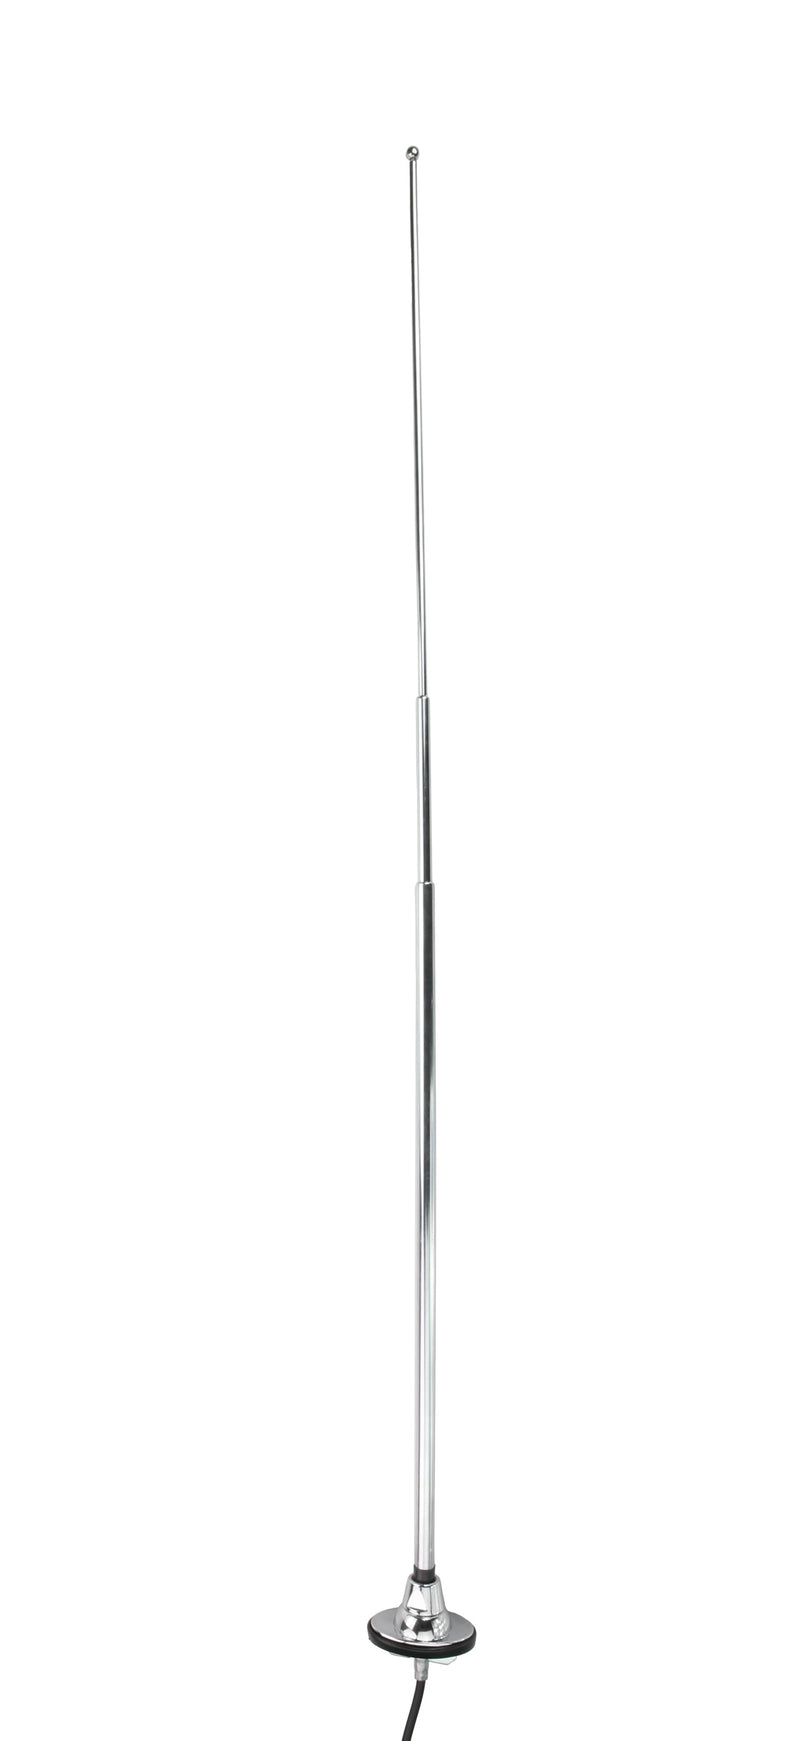 1974-78 Ford Mustang Replacement Antenna